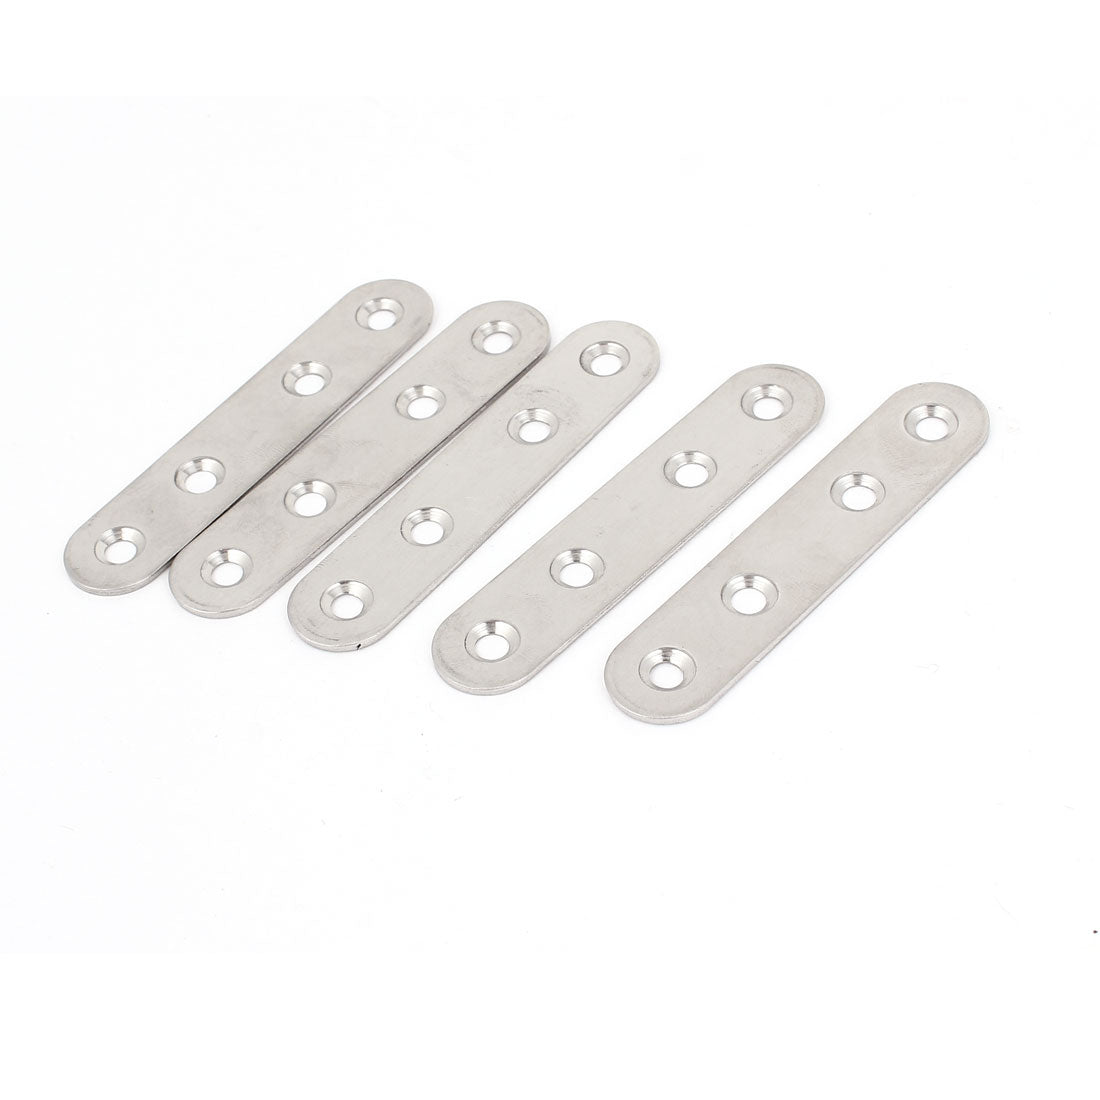 uxcell Uxcell 80mm x 17mm Flat Repair Mending Fixing Plate Brackets Joining Support 5pcs